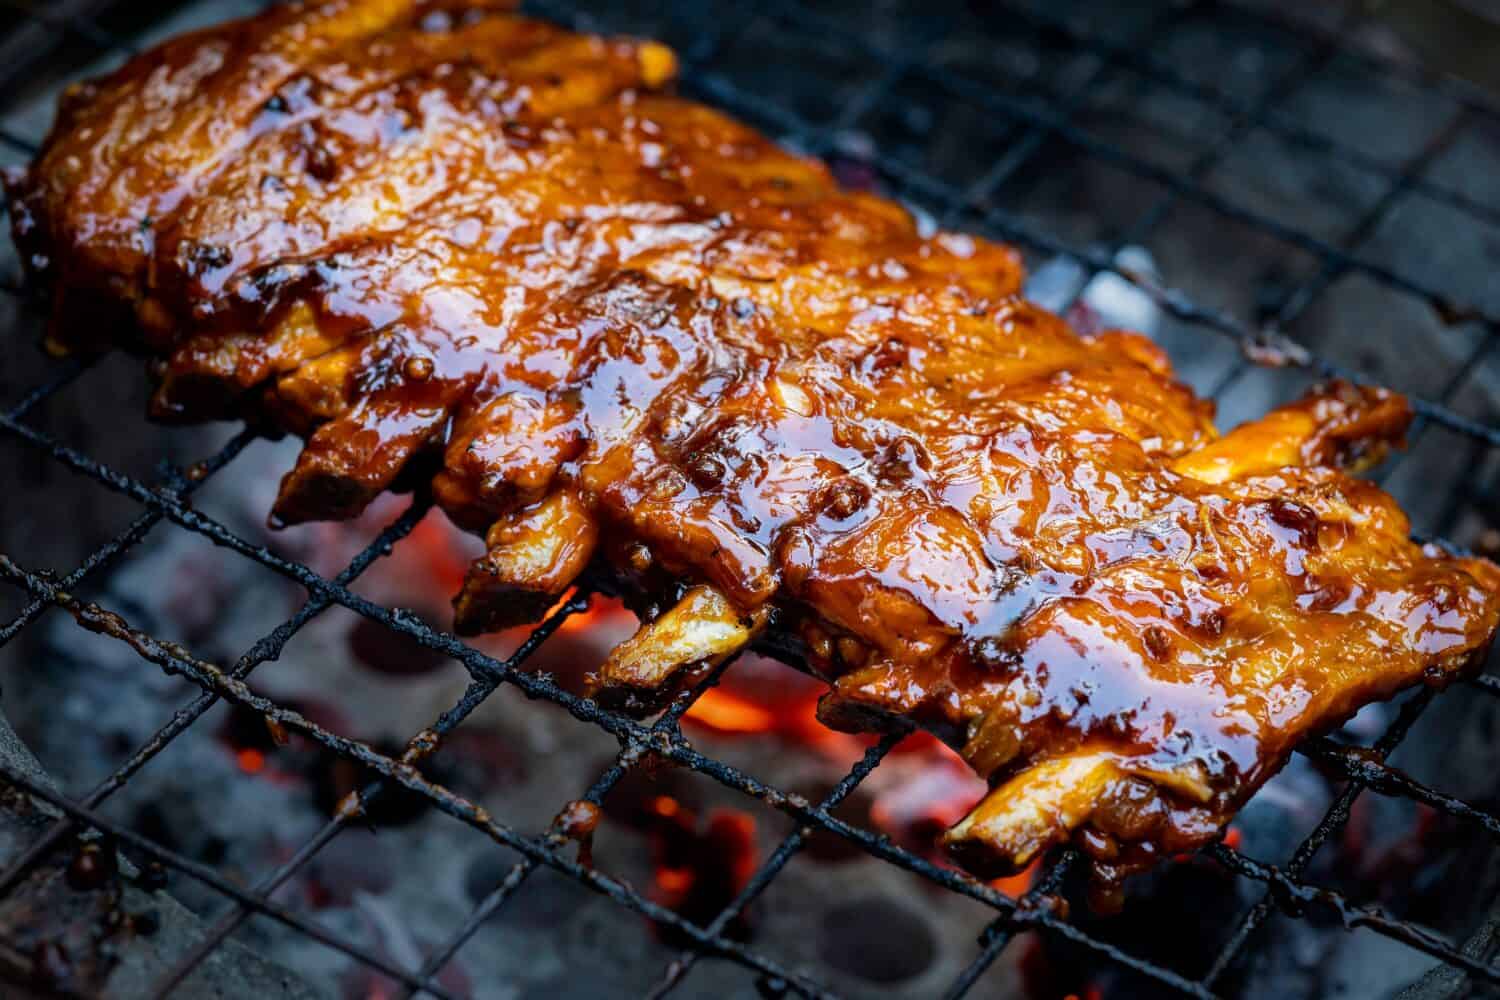 Pork ribs being grilled on smouldering charcoal